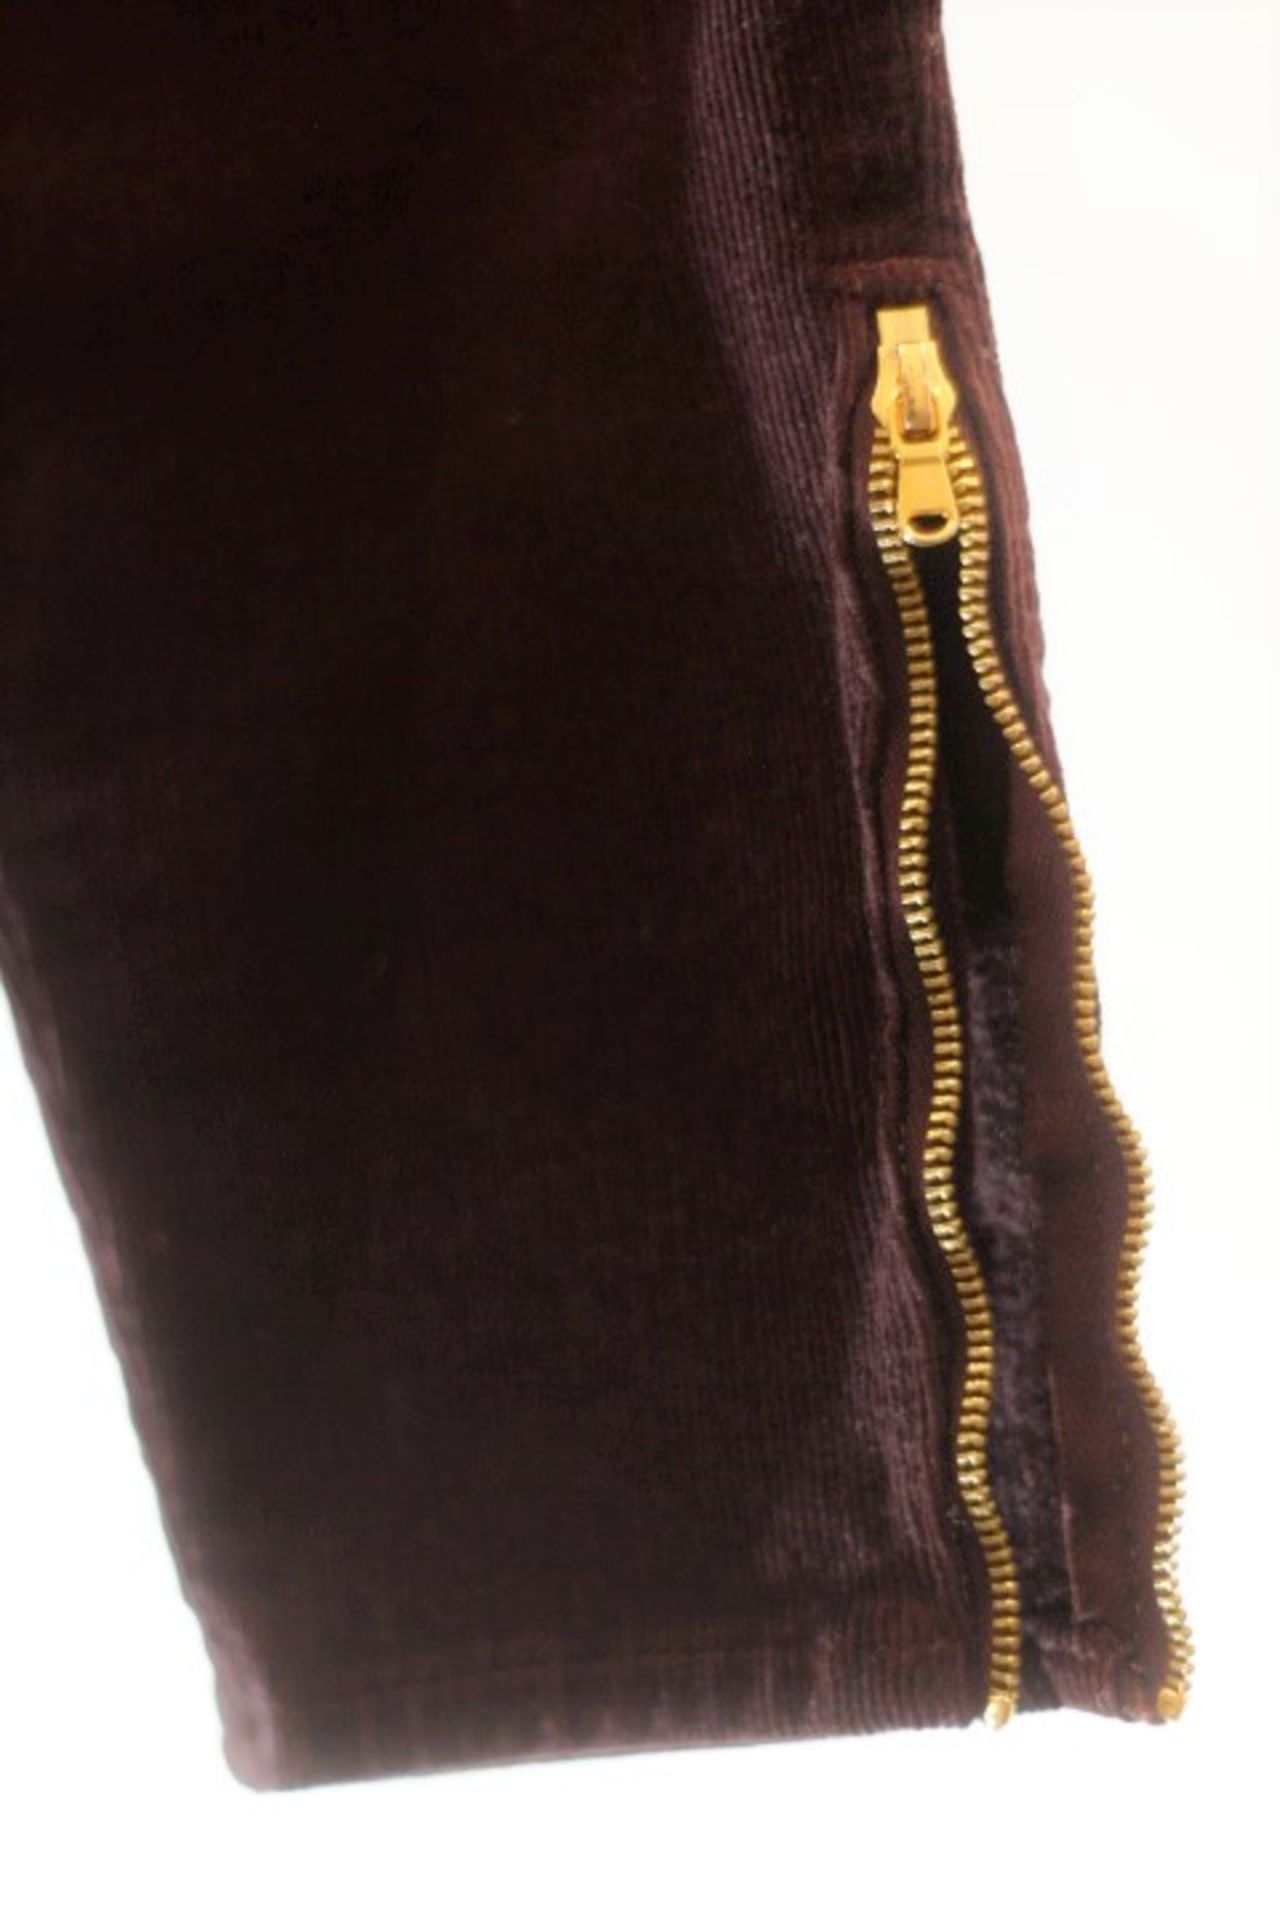 1 x J Brand Blackberry Corduroy Jeans - Size: 6 to 8 - Material: 56% Cotton, 37% Modal, 6% - Image 5 of 6